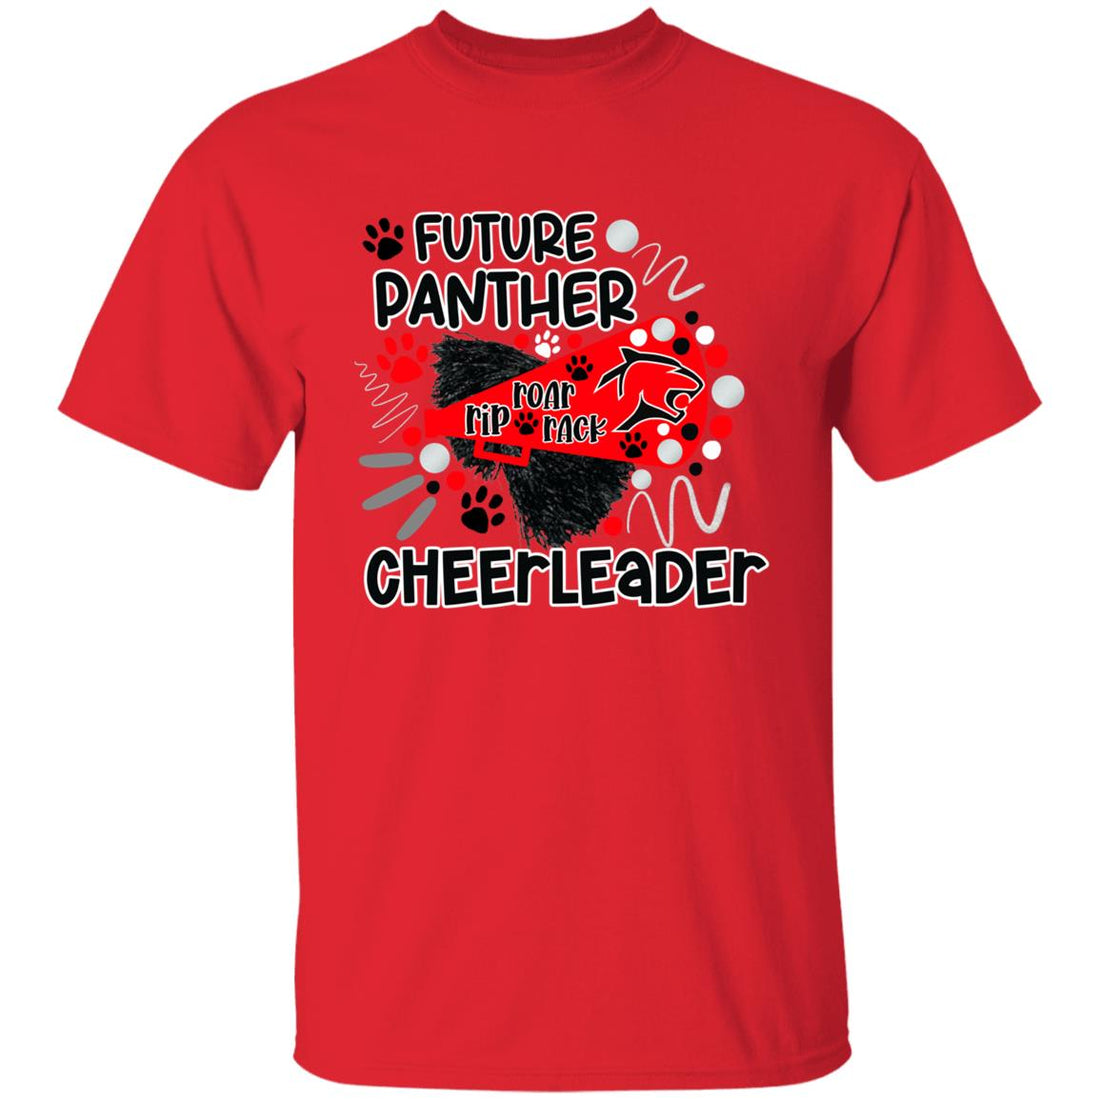 Future Panther Cheerleader Youth 5.3 oz 100% Cotton T-Shirt - T-Shirts - Positively Sassy - Future Panther Cheerleader Youth 5.3 oz 100% Cotton T-Shirt